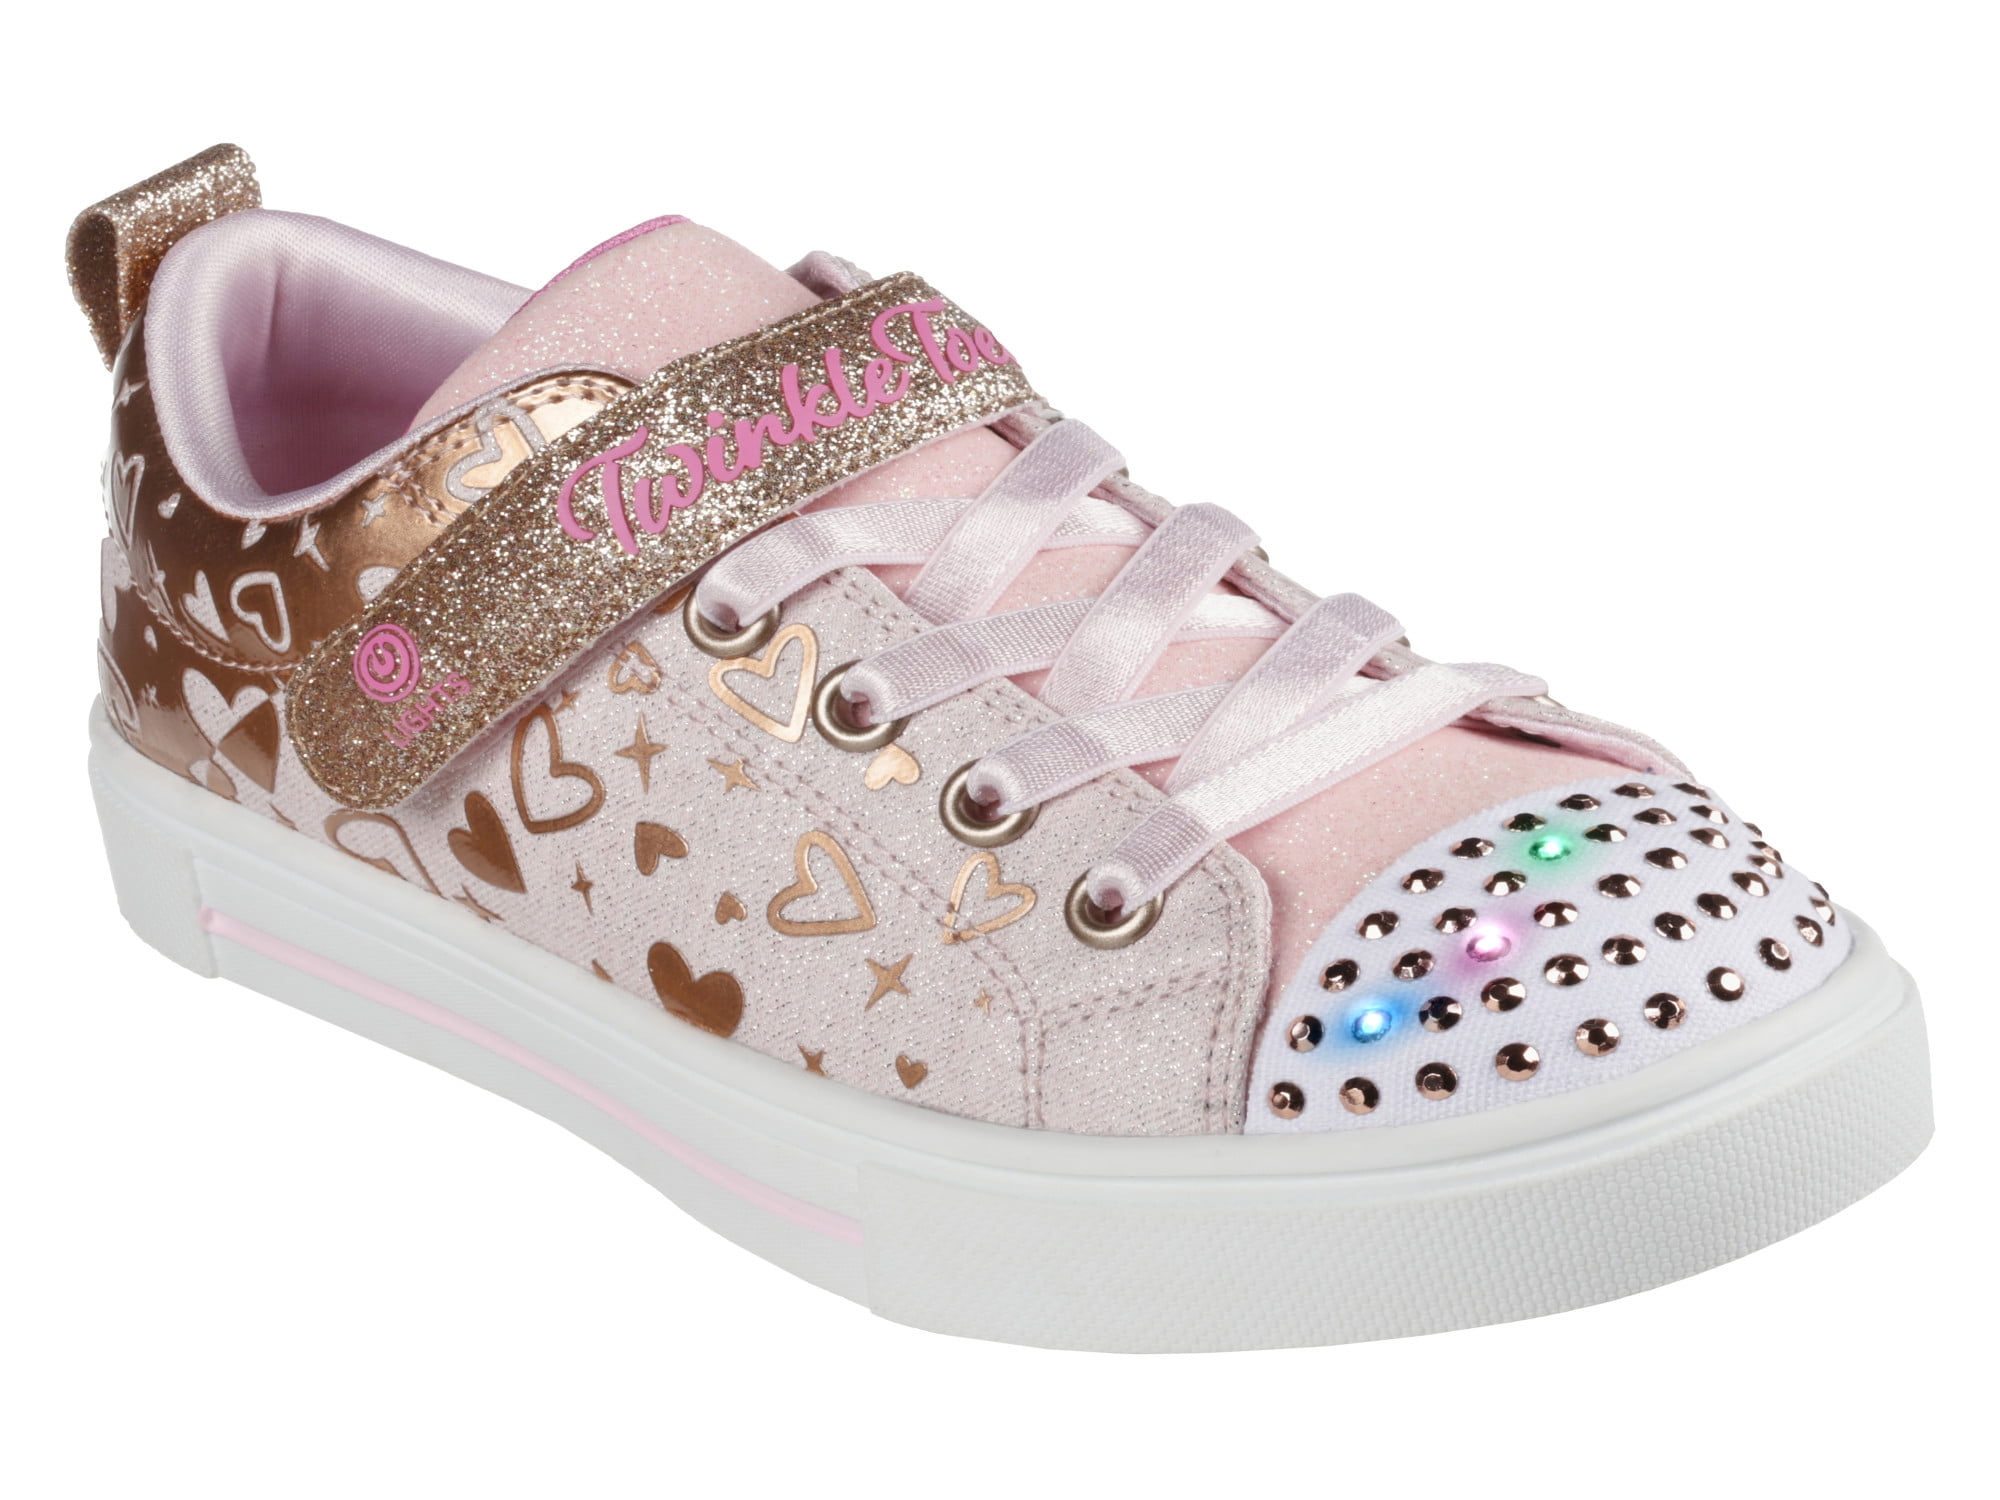 Skechers Girls Youth Twinkle Toes Light Up Sneakers Heather Charm ...